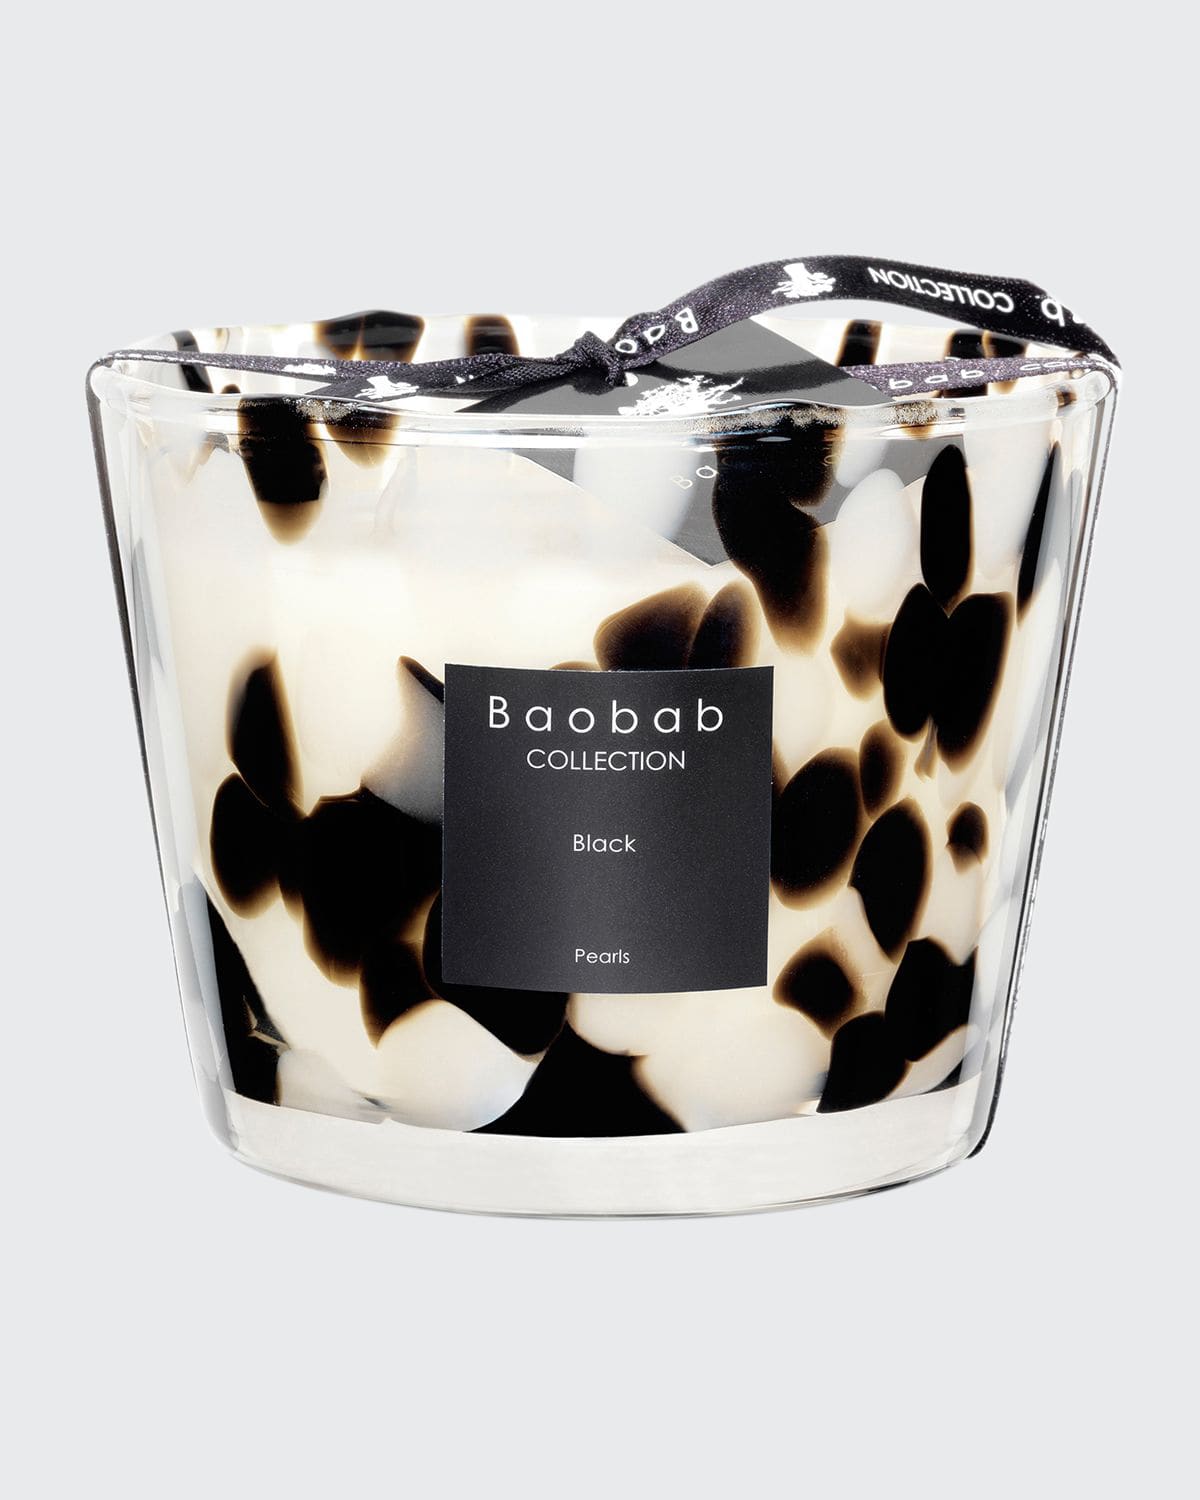 Baobab Collection Black Pearls Scented Candle, 3.9" In Black/white